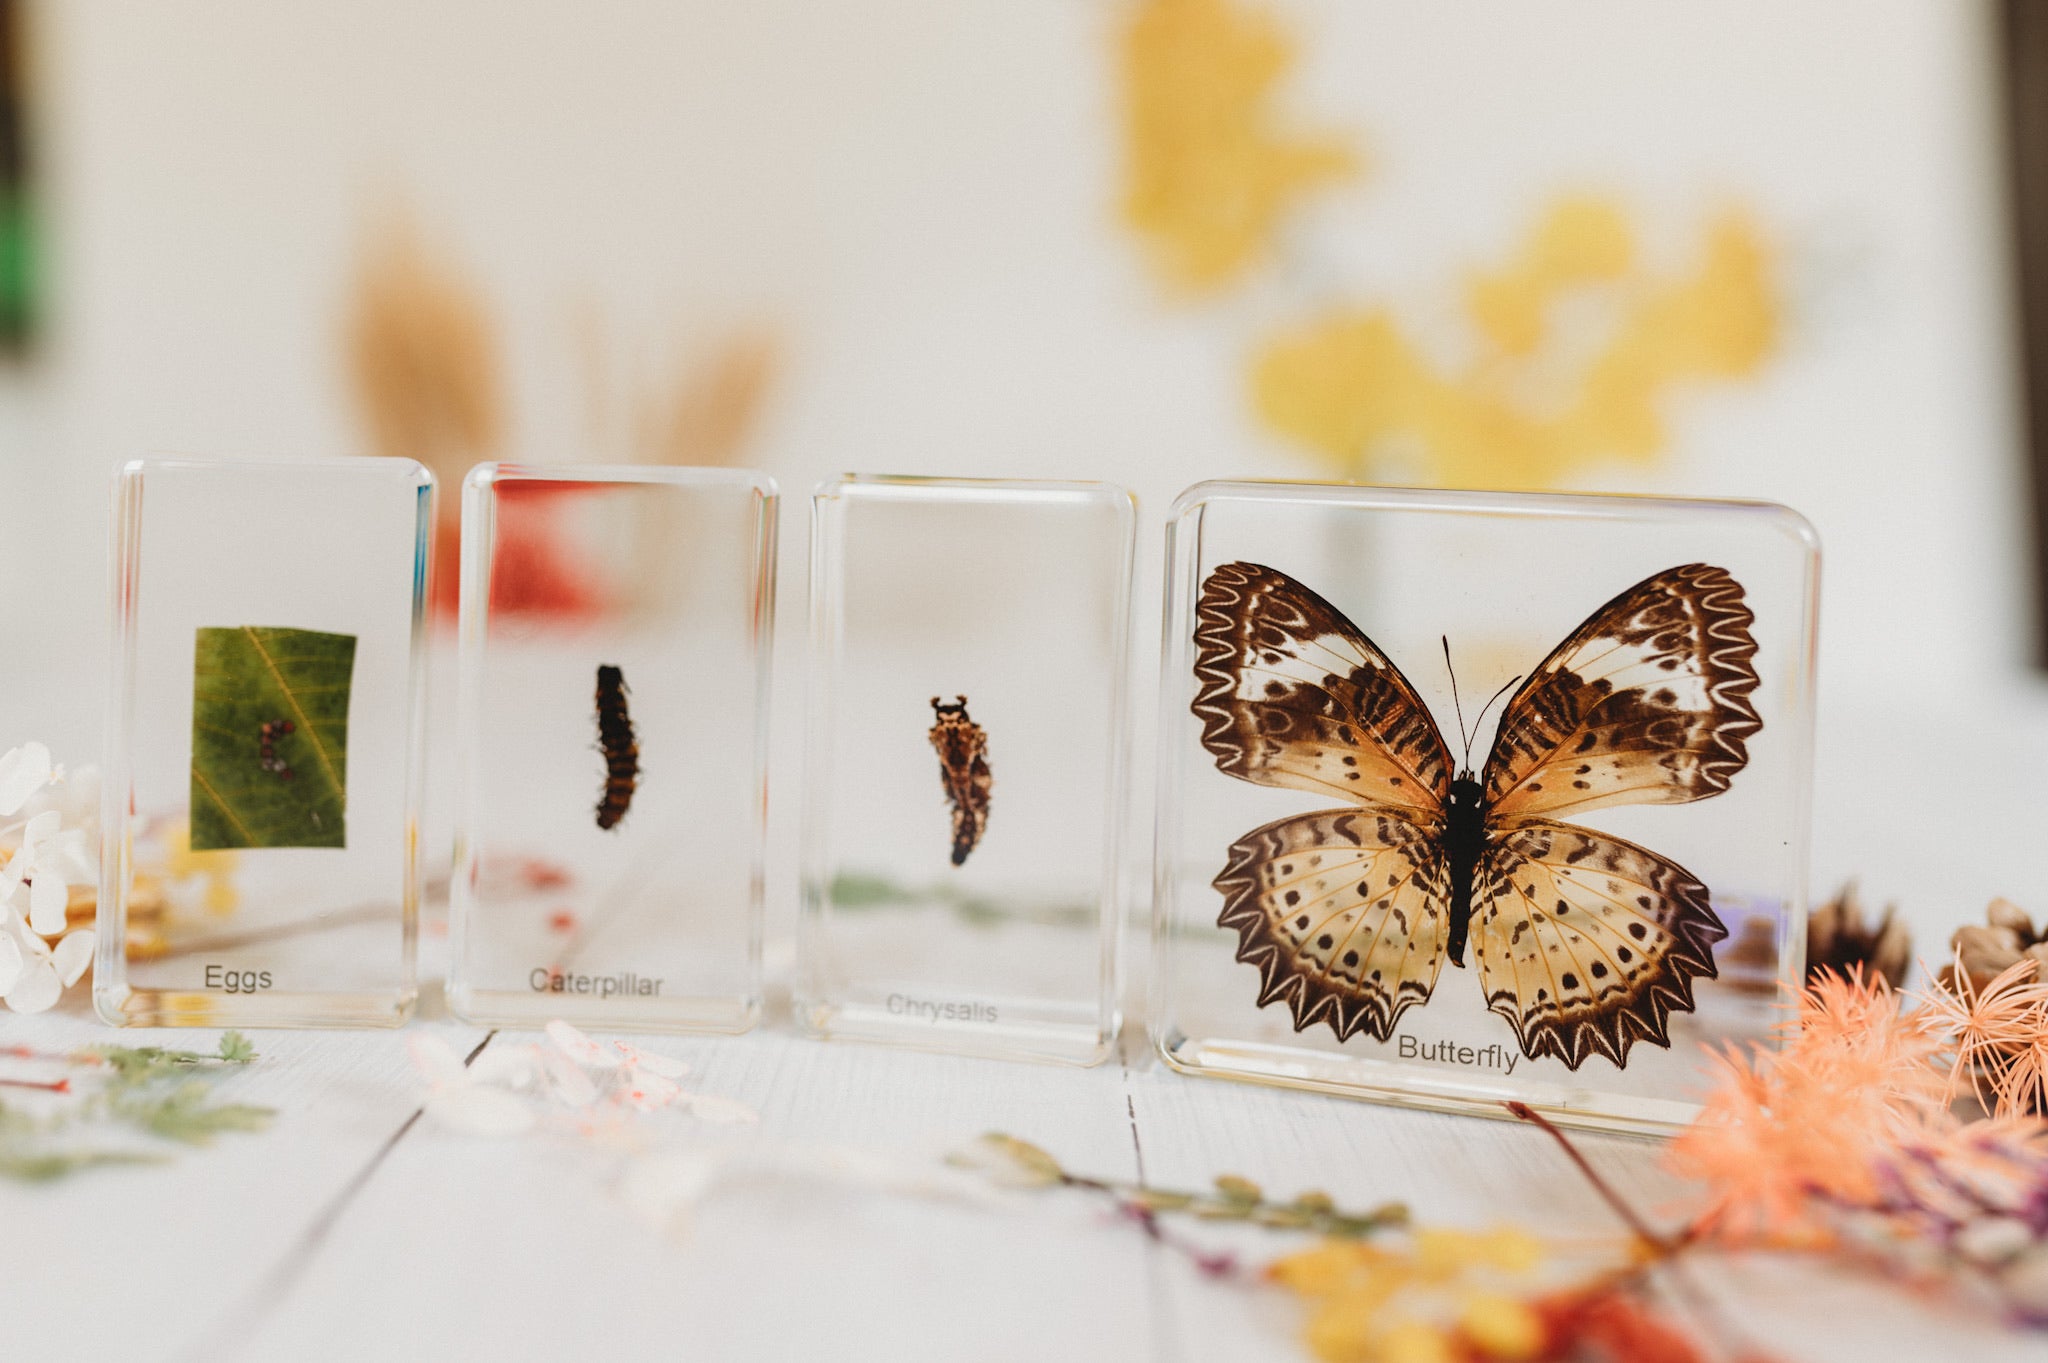 4 pieces Butterfly Lifecycle Specimen (Free Shipping)